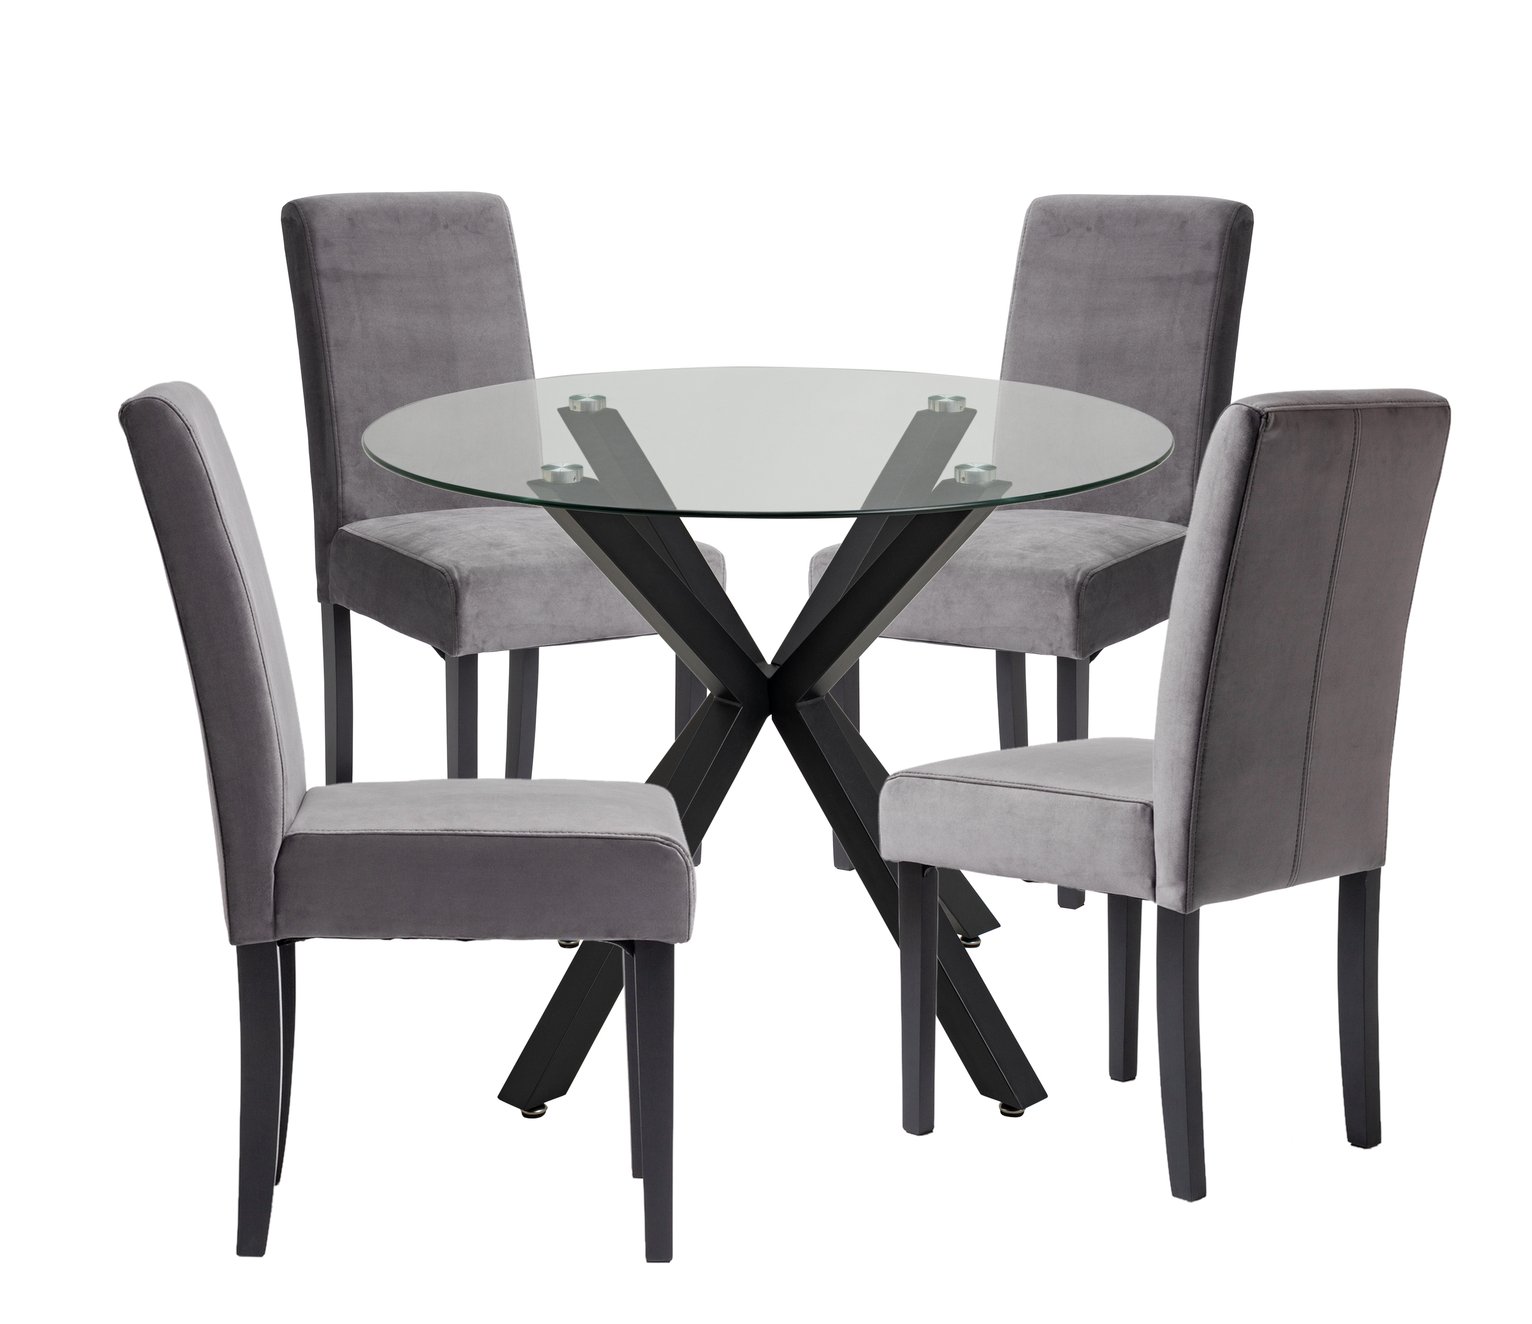 Argos Home Alice Glass and Black Table & 4 Grey Chairs